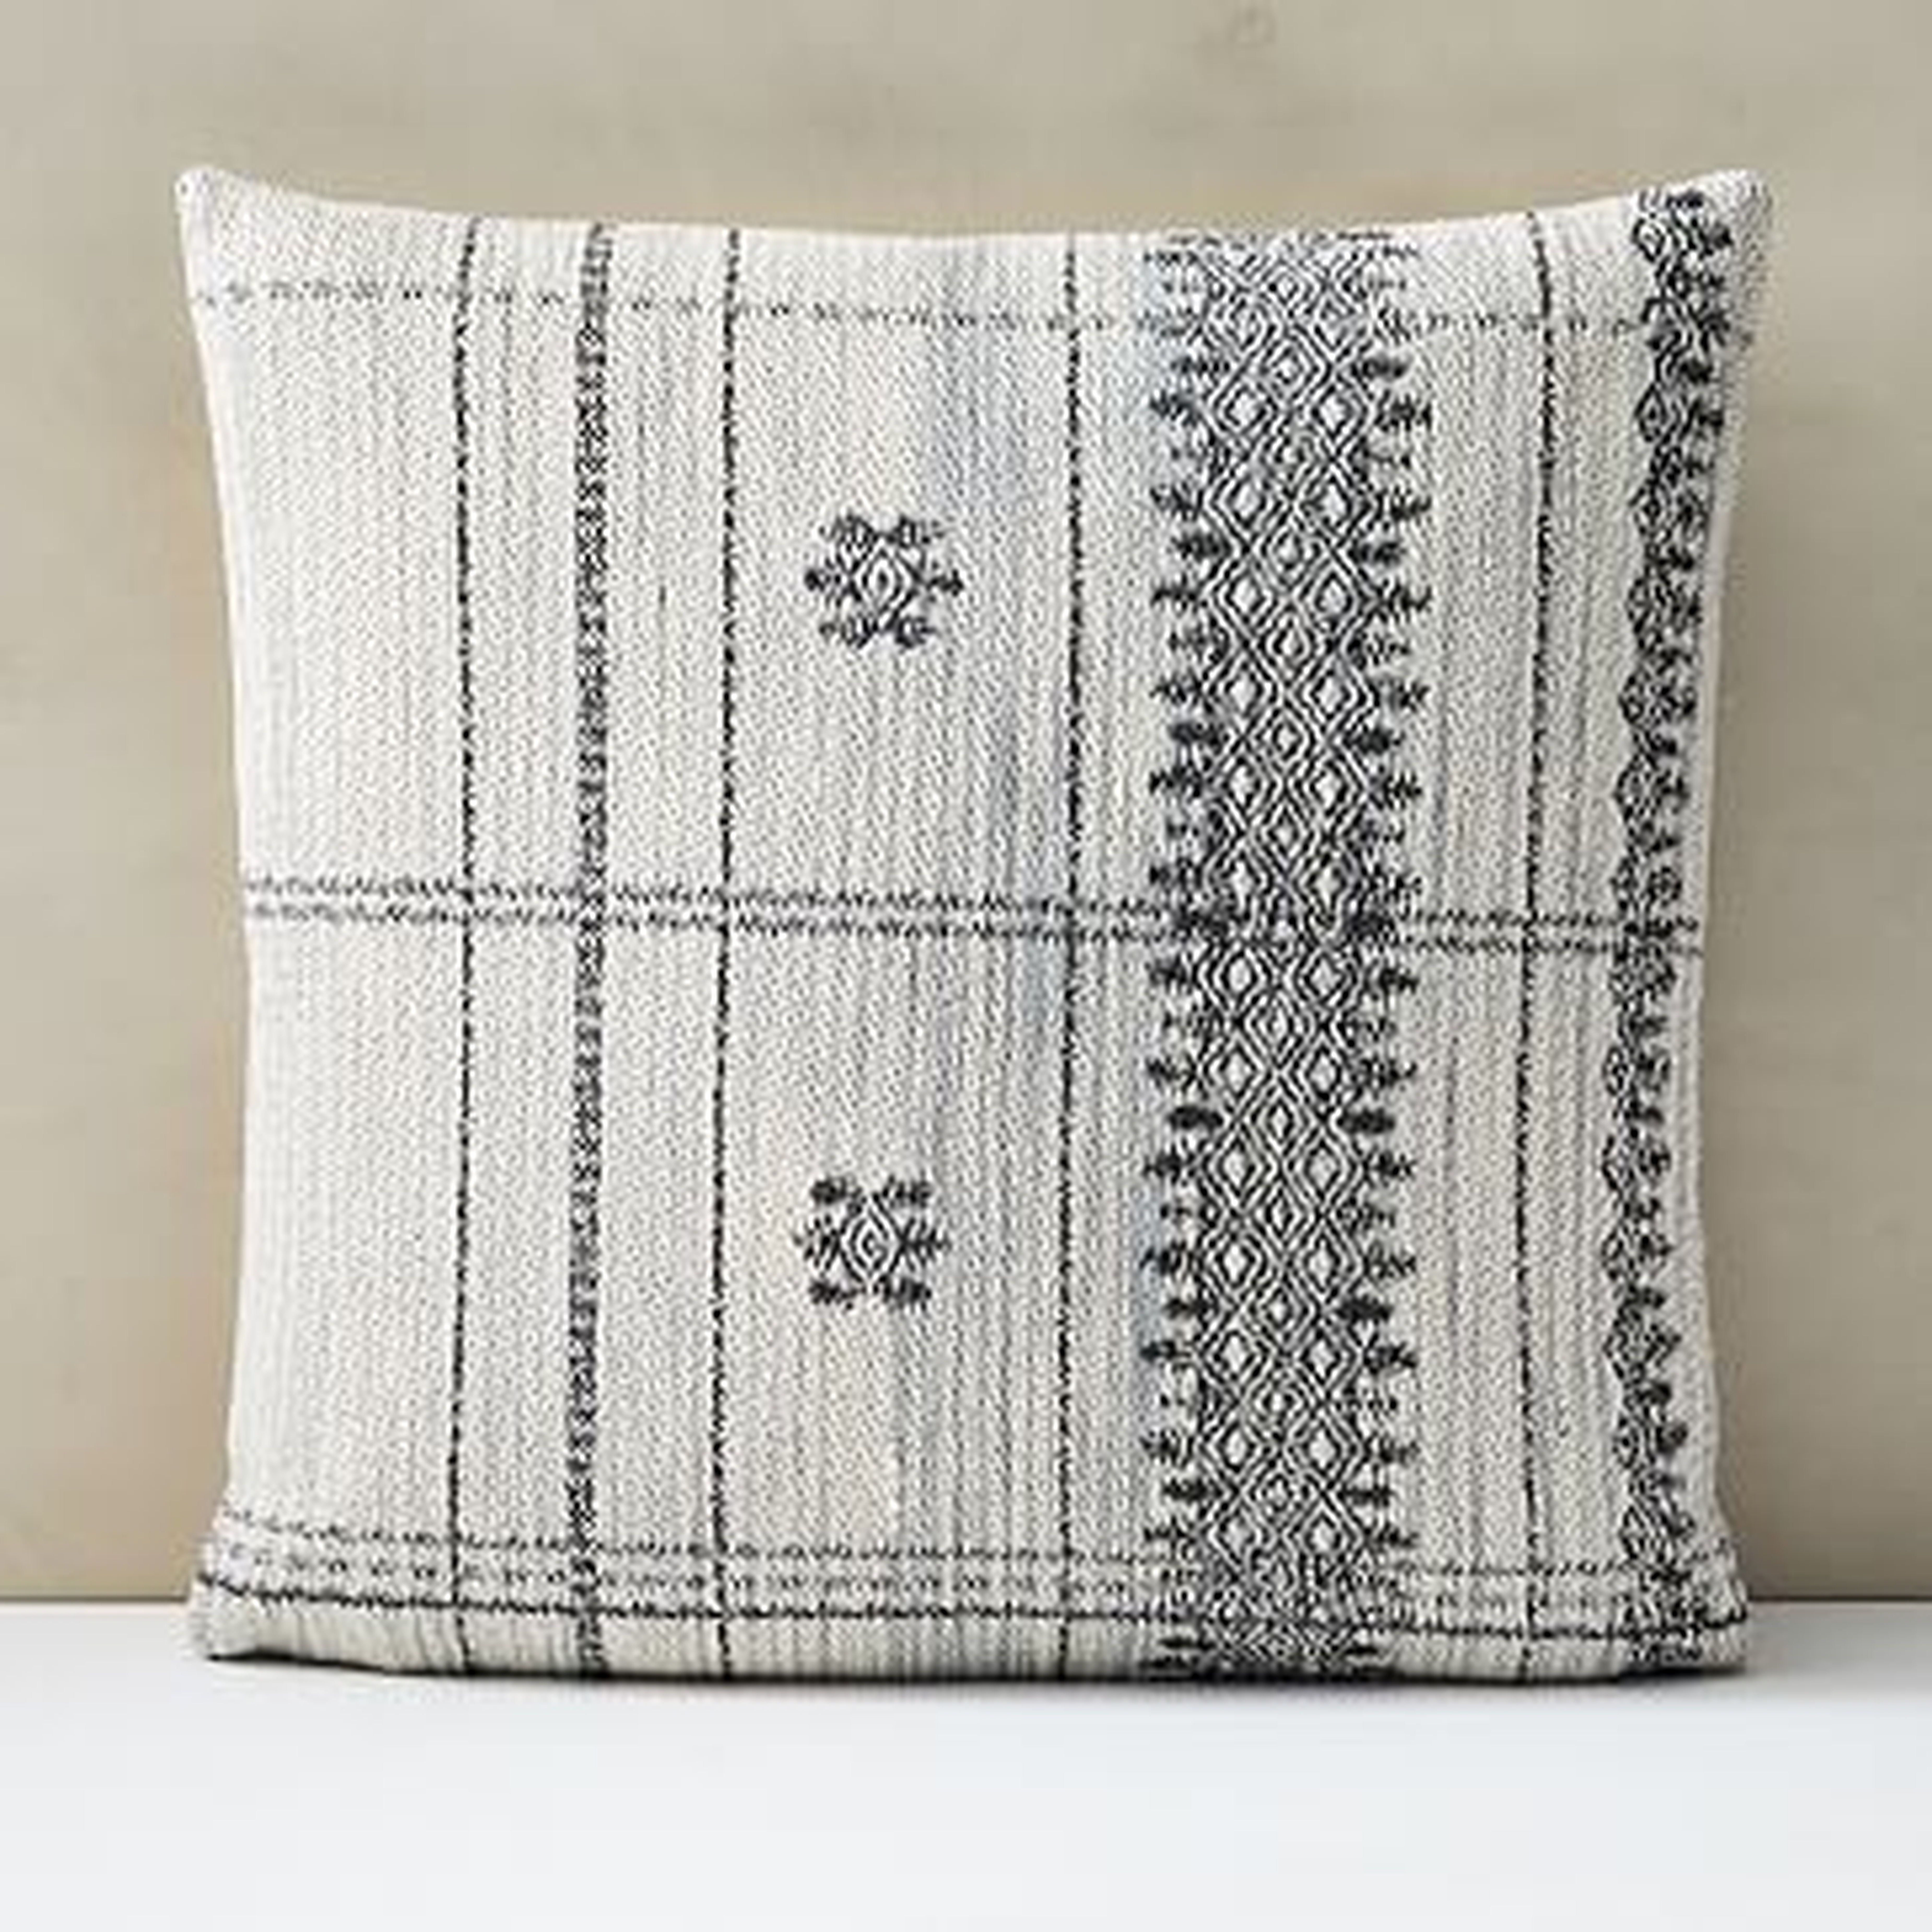 Woven Canyon Pillow Cover, 20"x20", Gray - West Elm